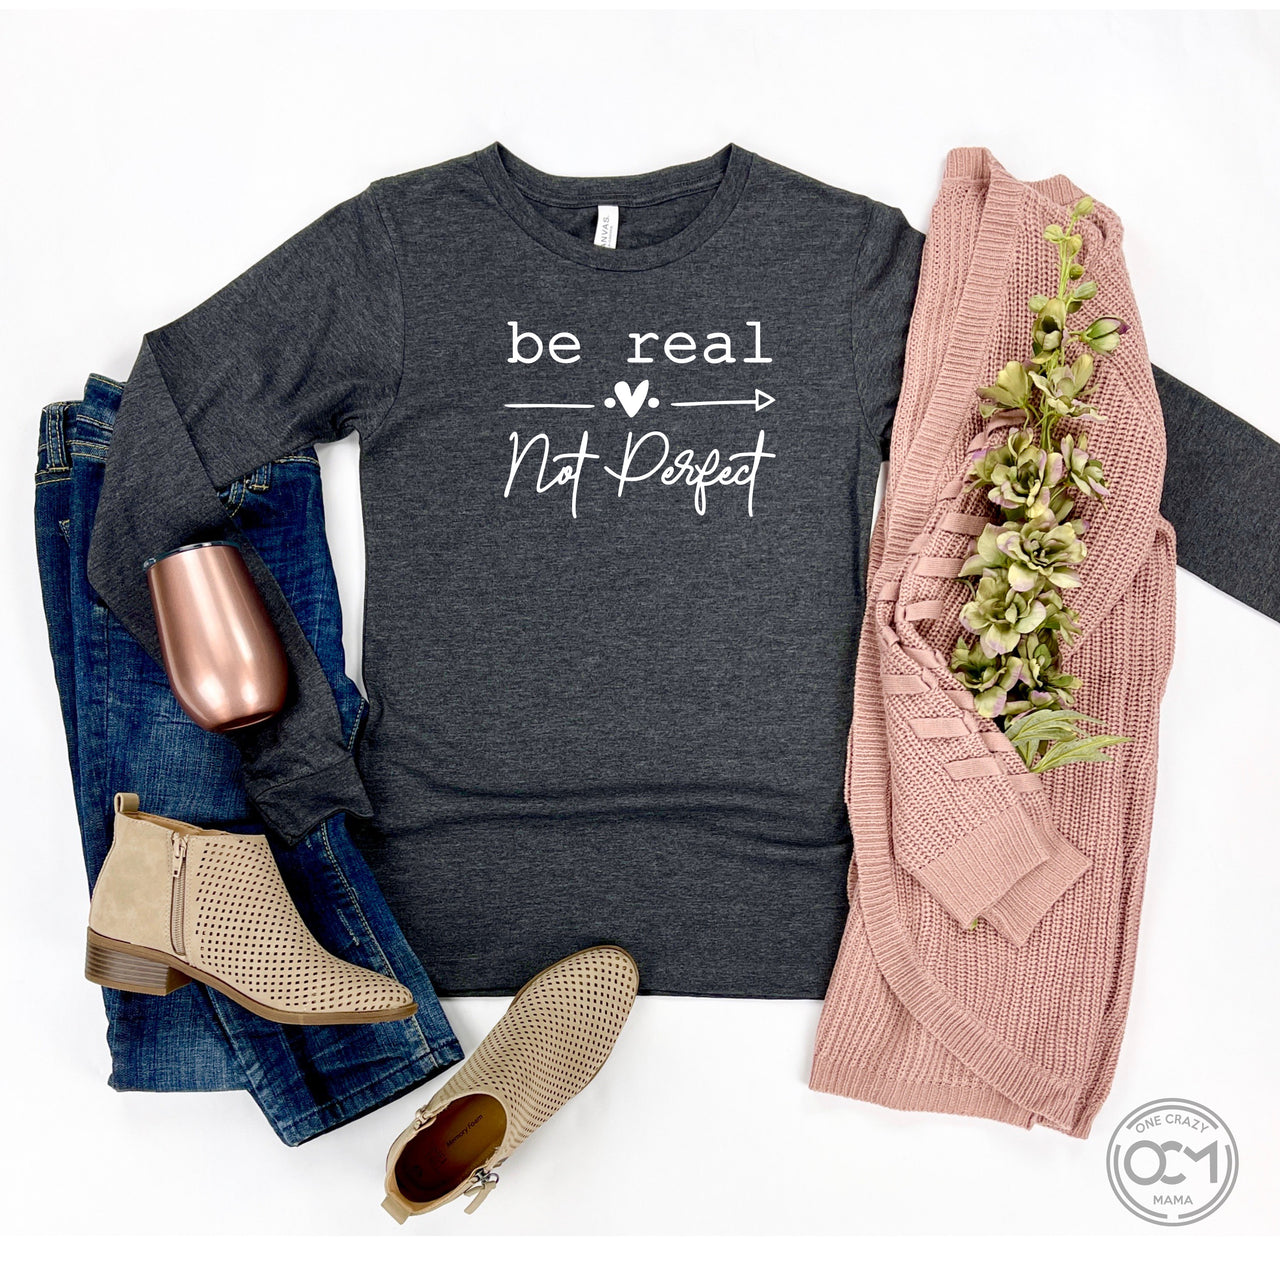 Adult - Unisex Long Sleeve Tee (Be Real Not Perfect)